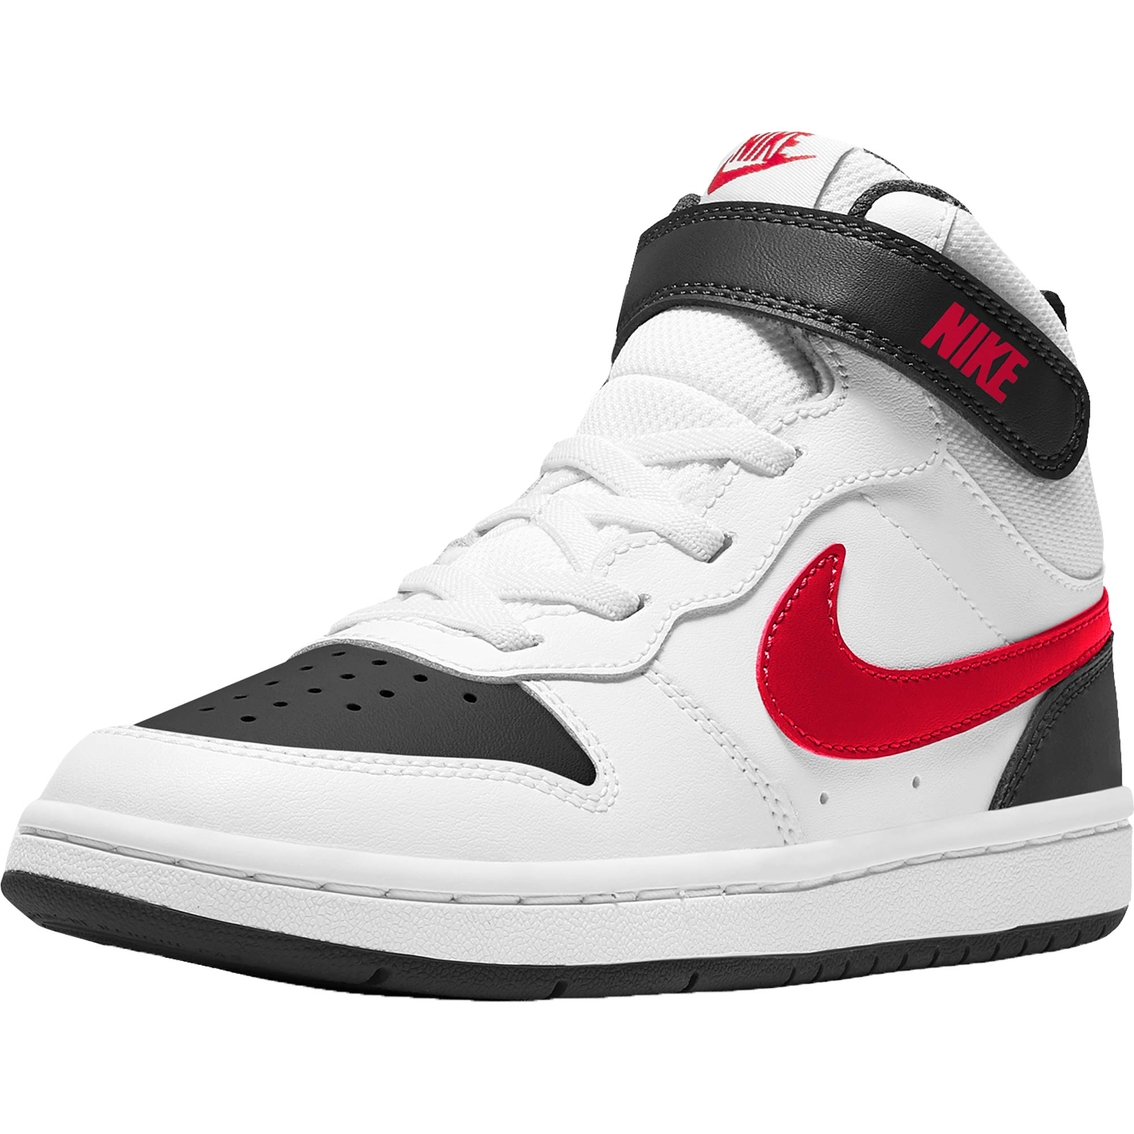 Nike Boys Court Borough Mid 2 Sneakers | Children's Athletic Shoes ...